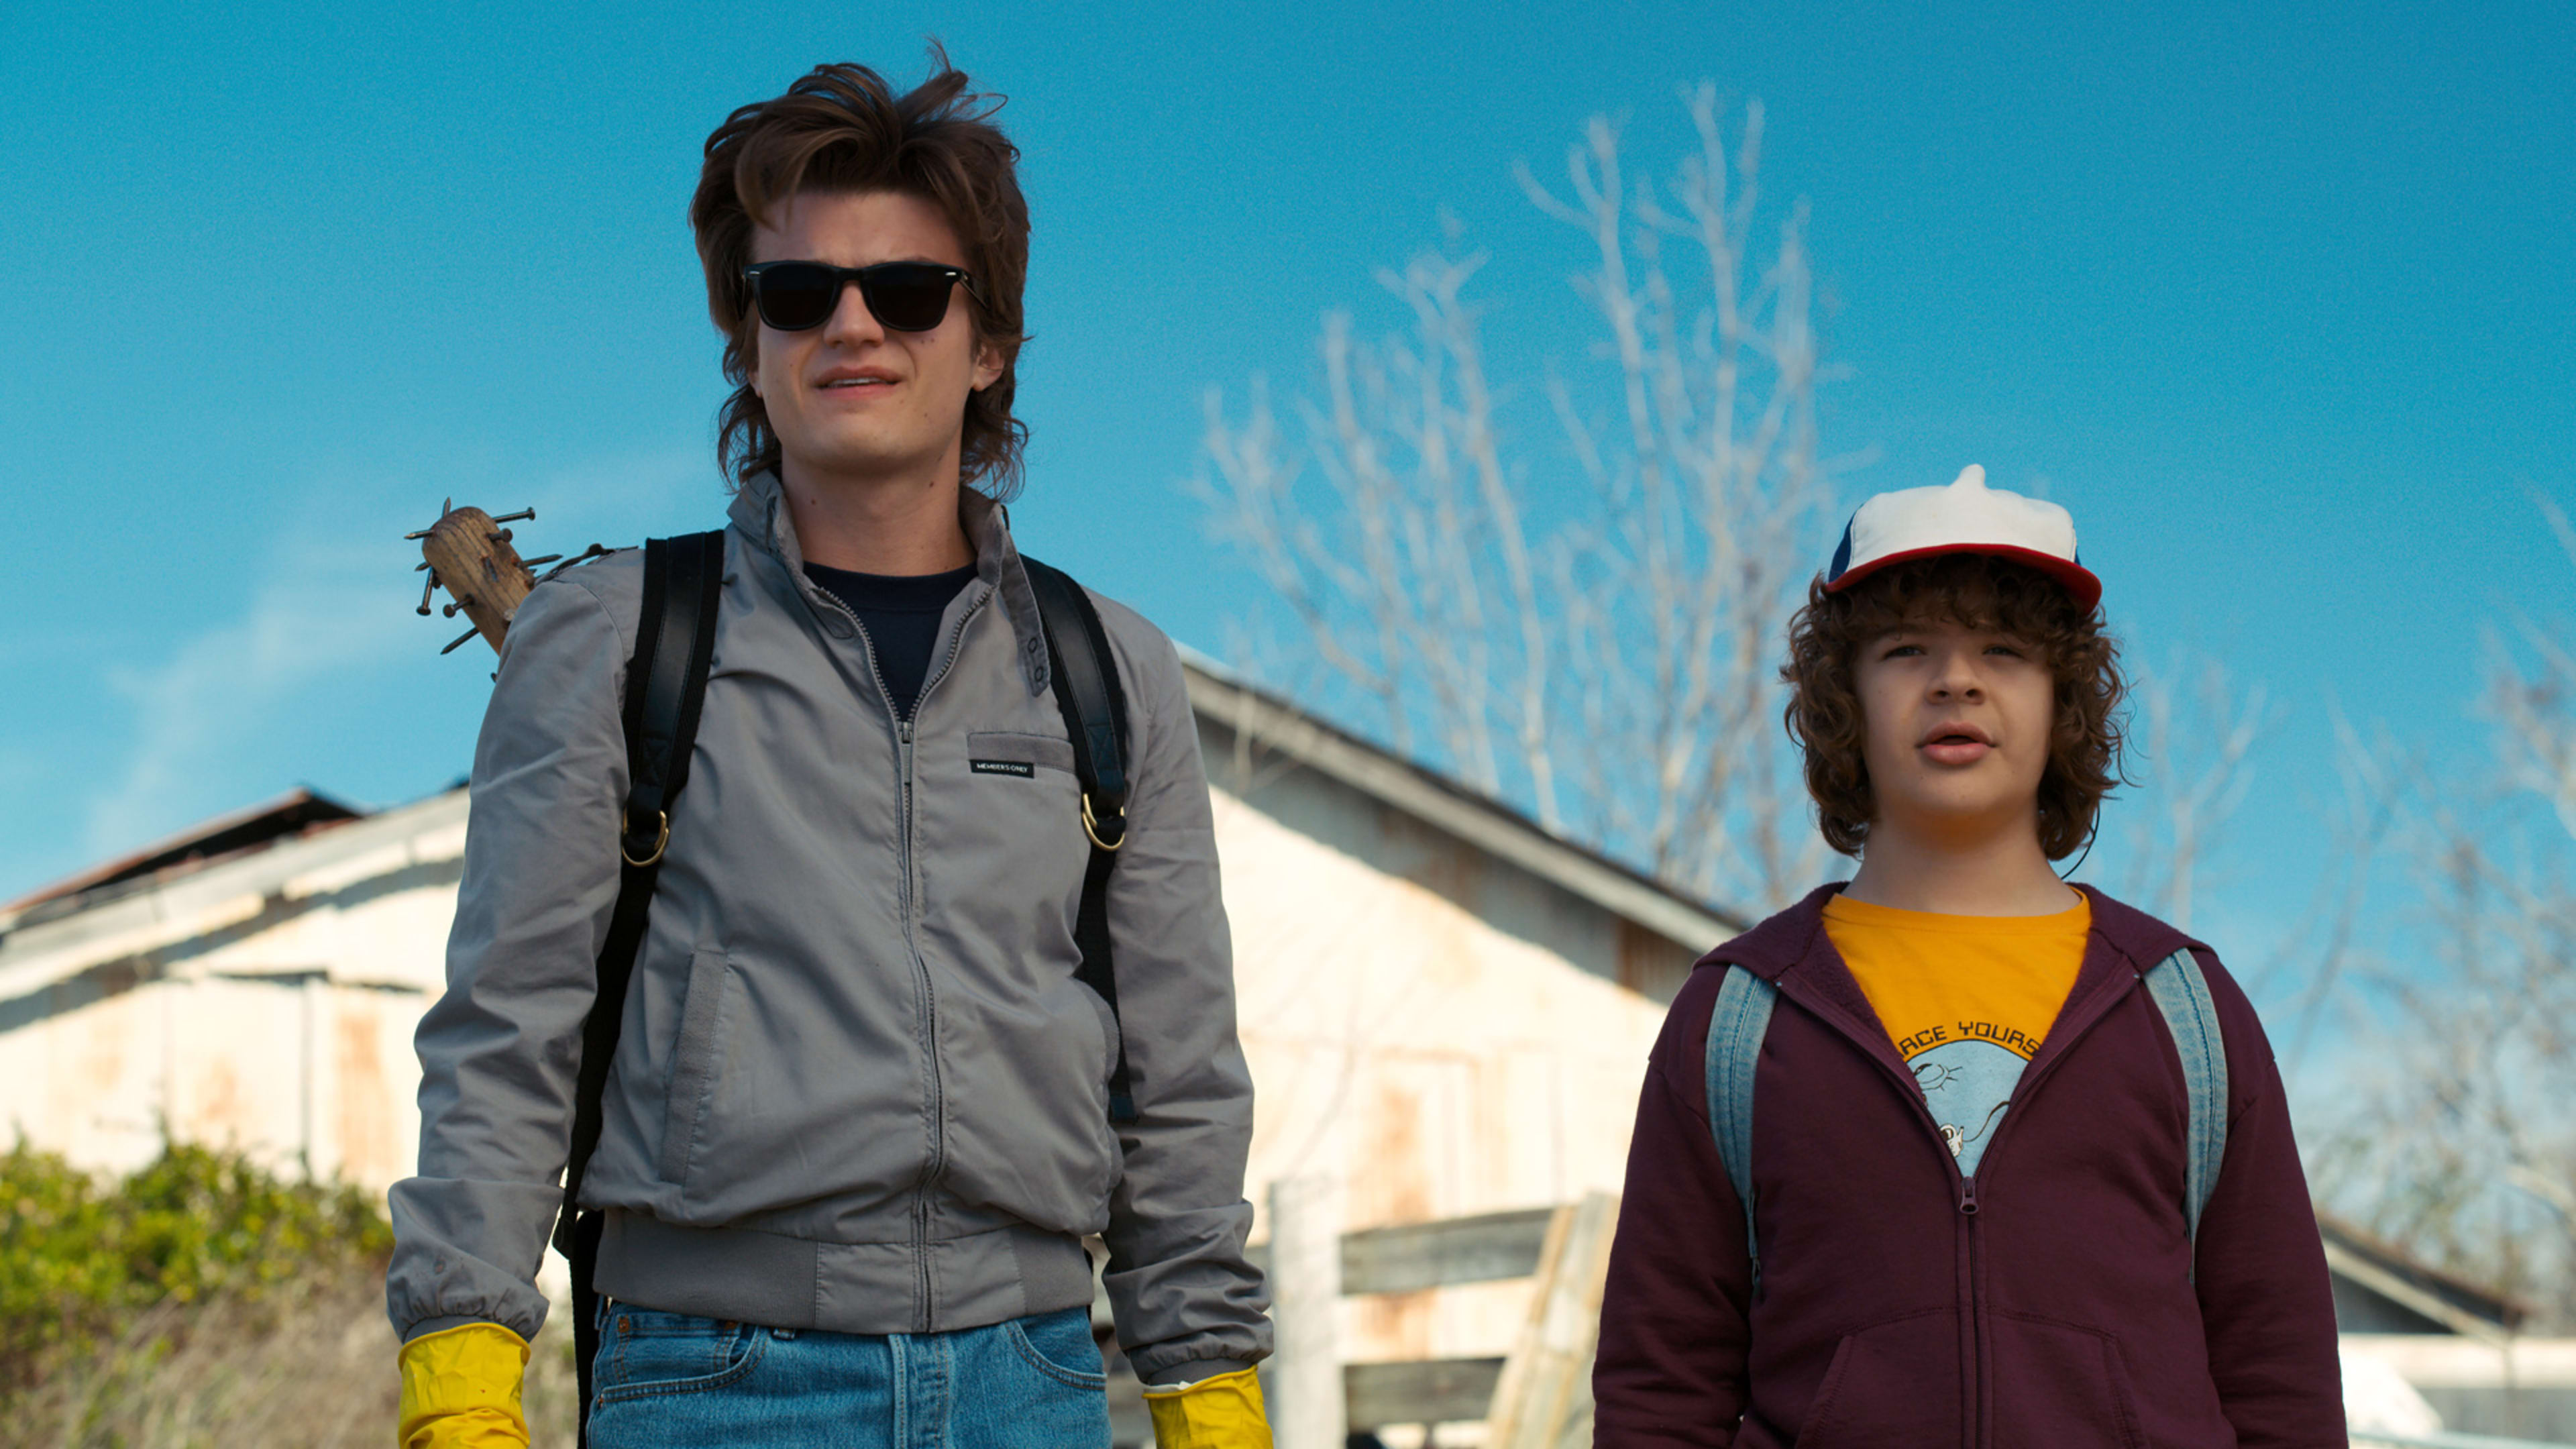 Netflix stock jumps ahead of earnings, and we can probably thank “Stranger Things”